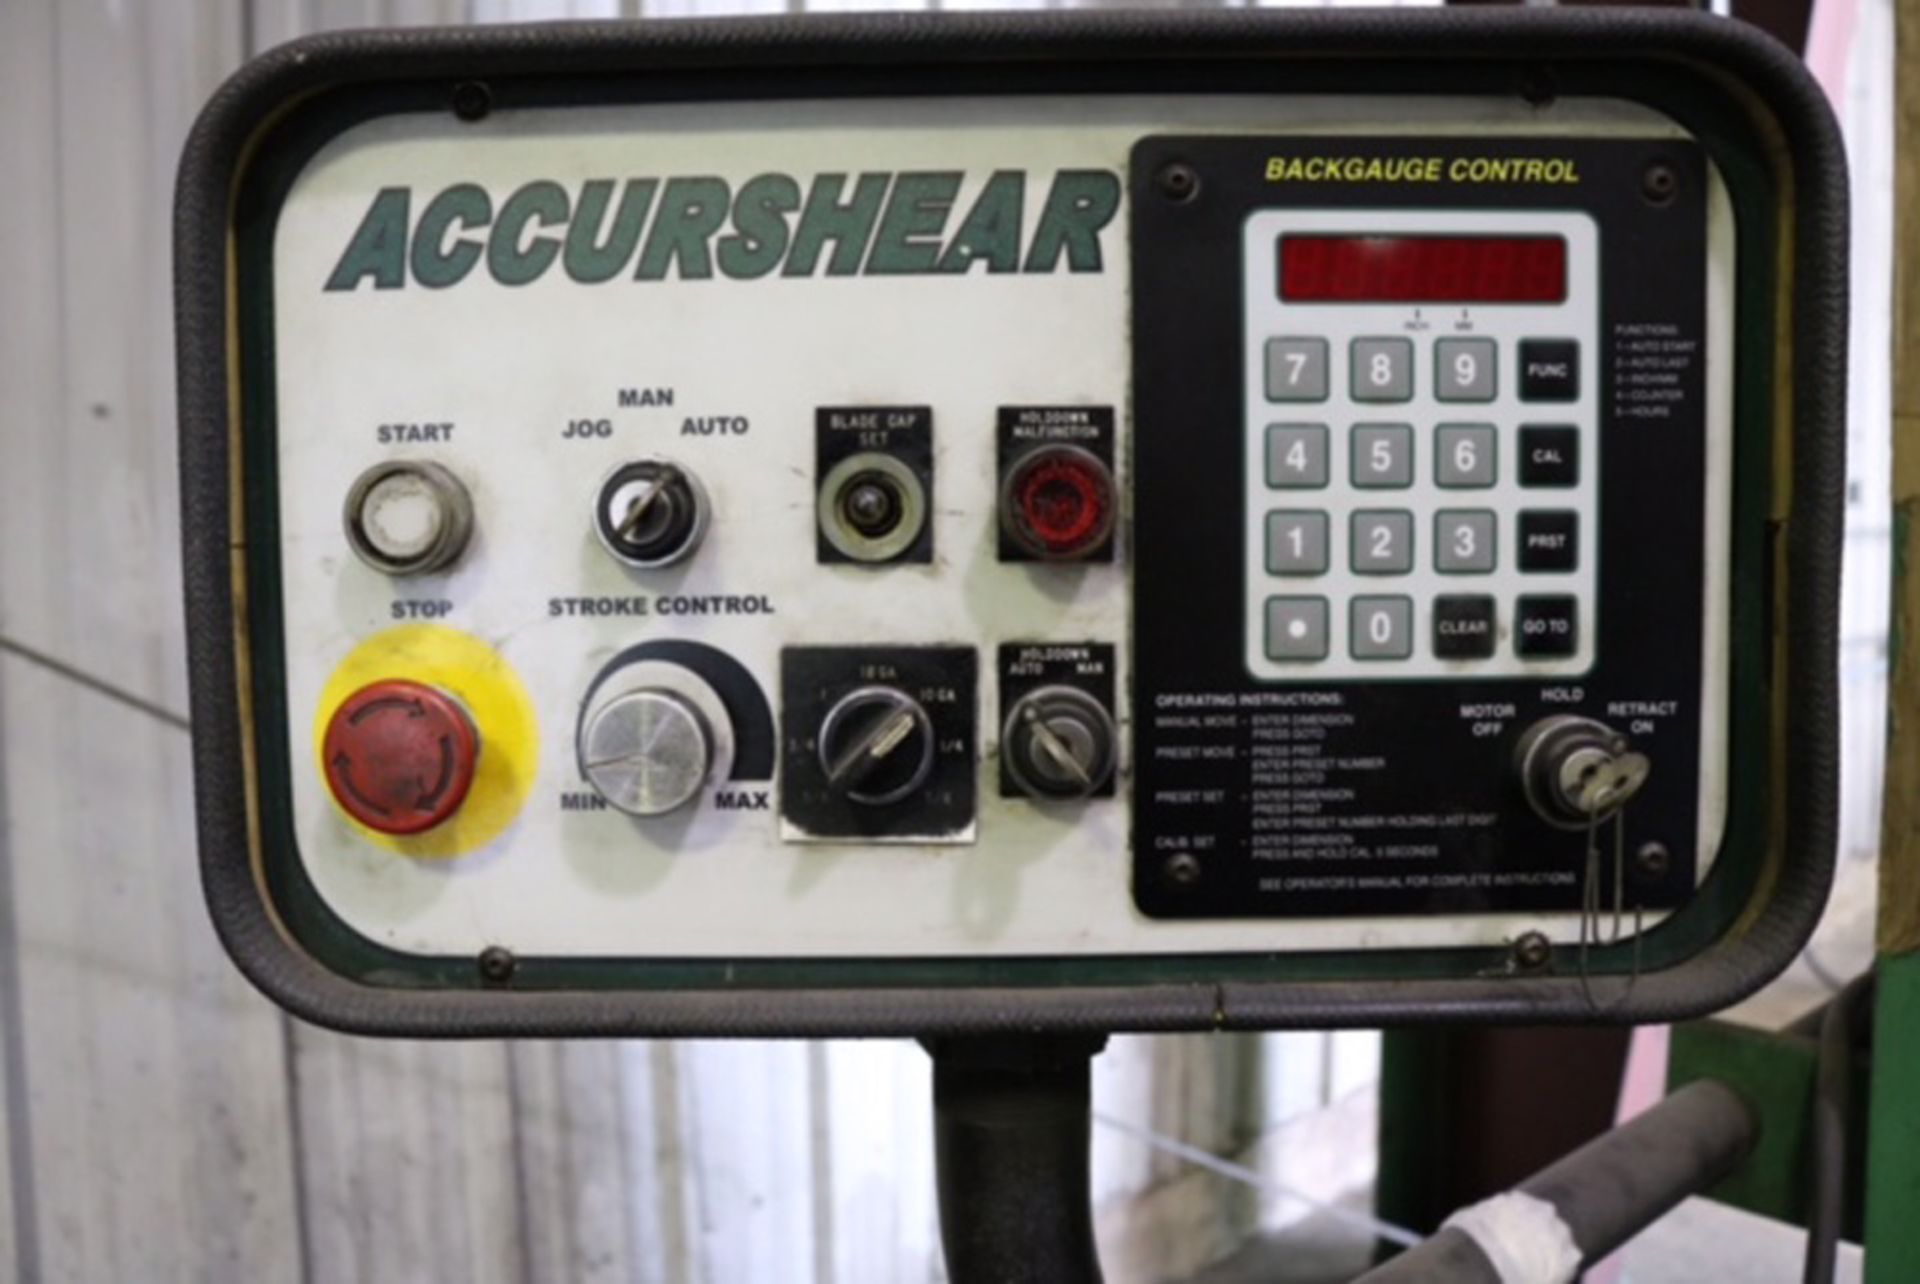 ACCURSHEAR HYDRAULIC POWER SHEAR, MDL 8100012, YEAR: 1999, ACCURSHEAR SC2 PROGRAMMABLE FRONT - Image 7 of 7